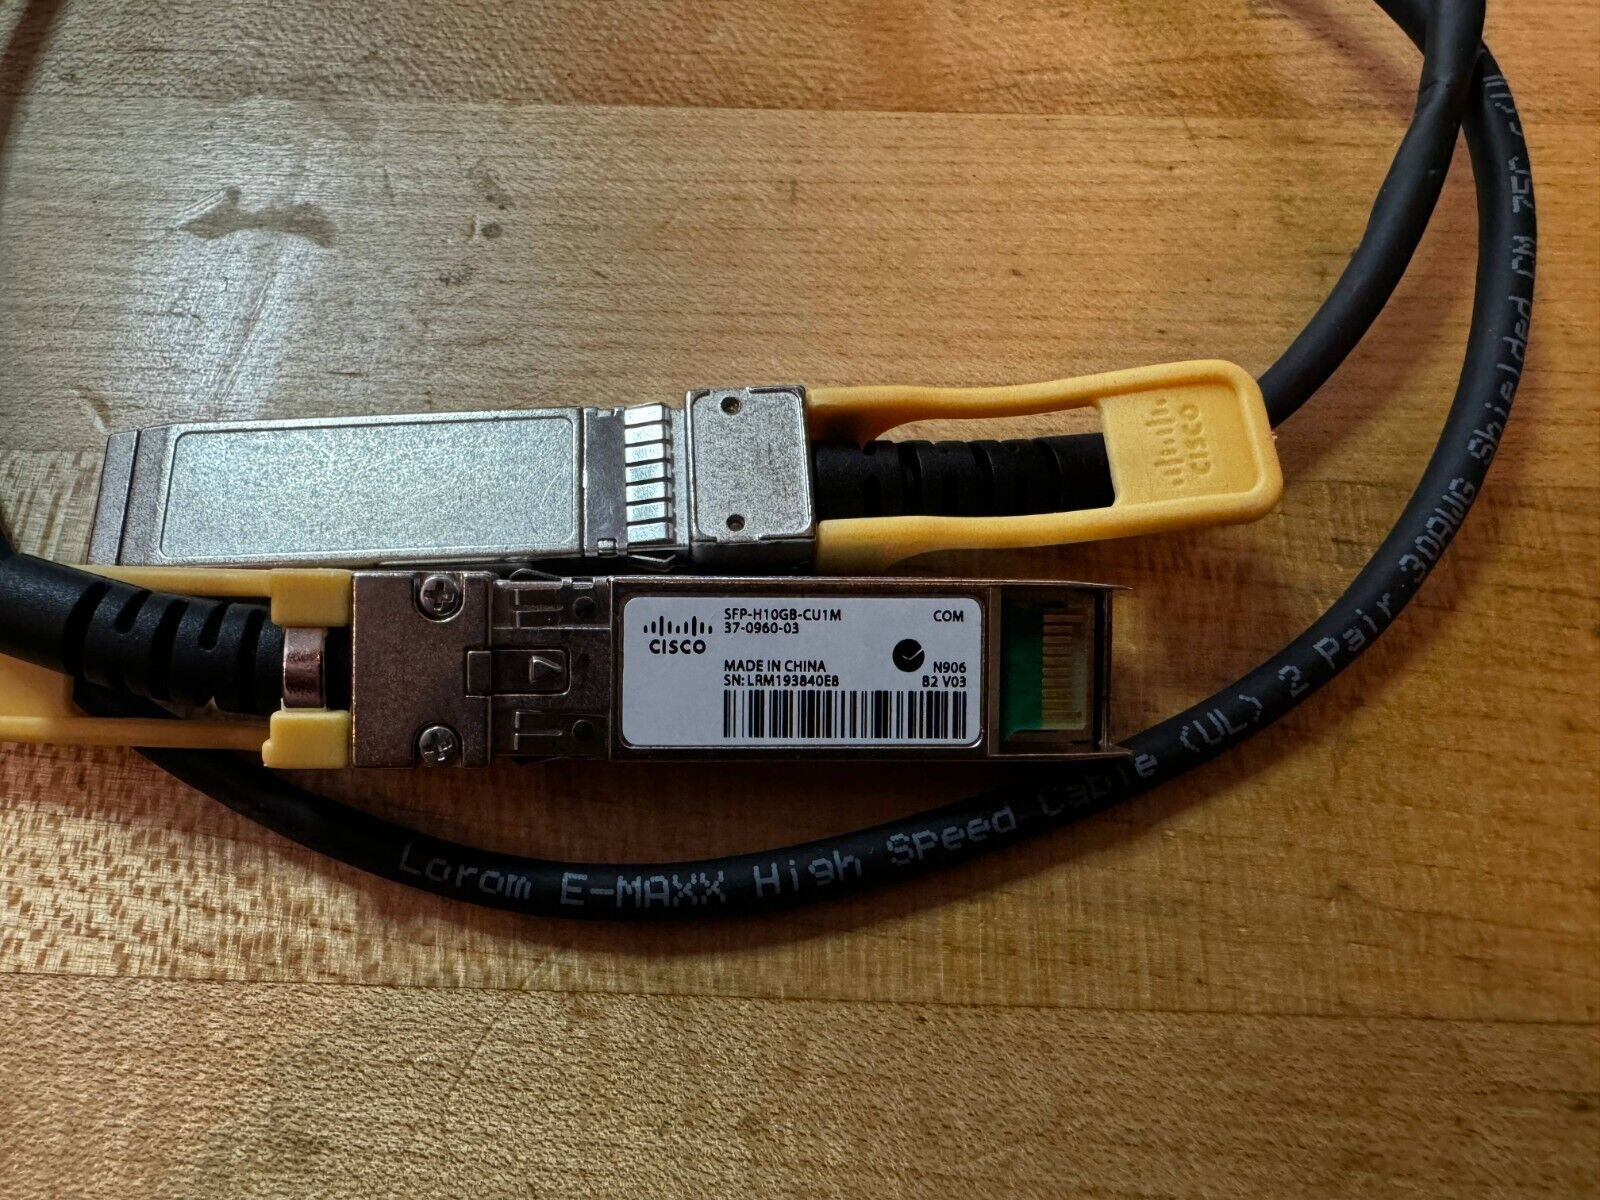 Cisco SFP-H10GB-CU1M 10GBASE-CU SFP+ Cable 1 Meter [USED, Great Condition]